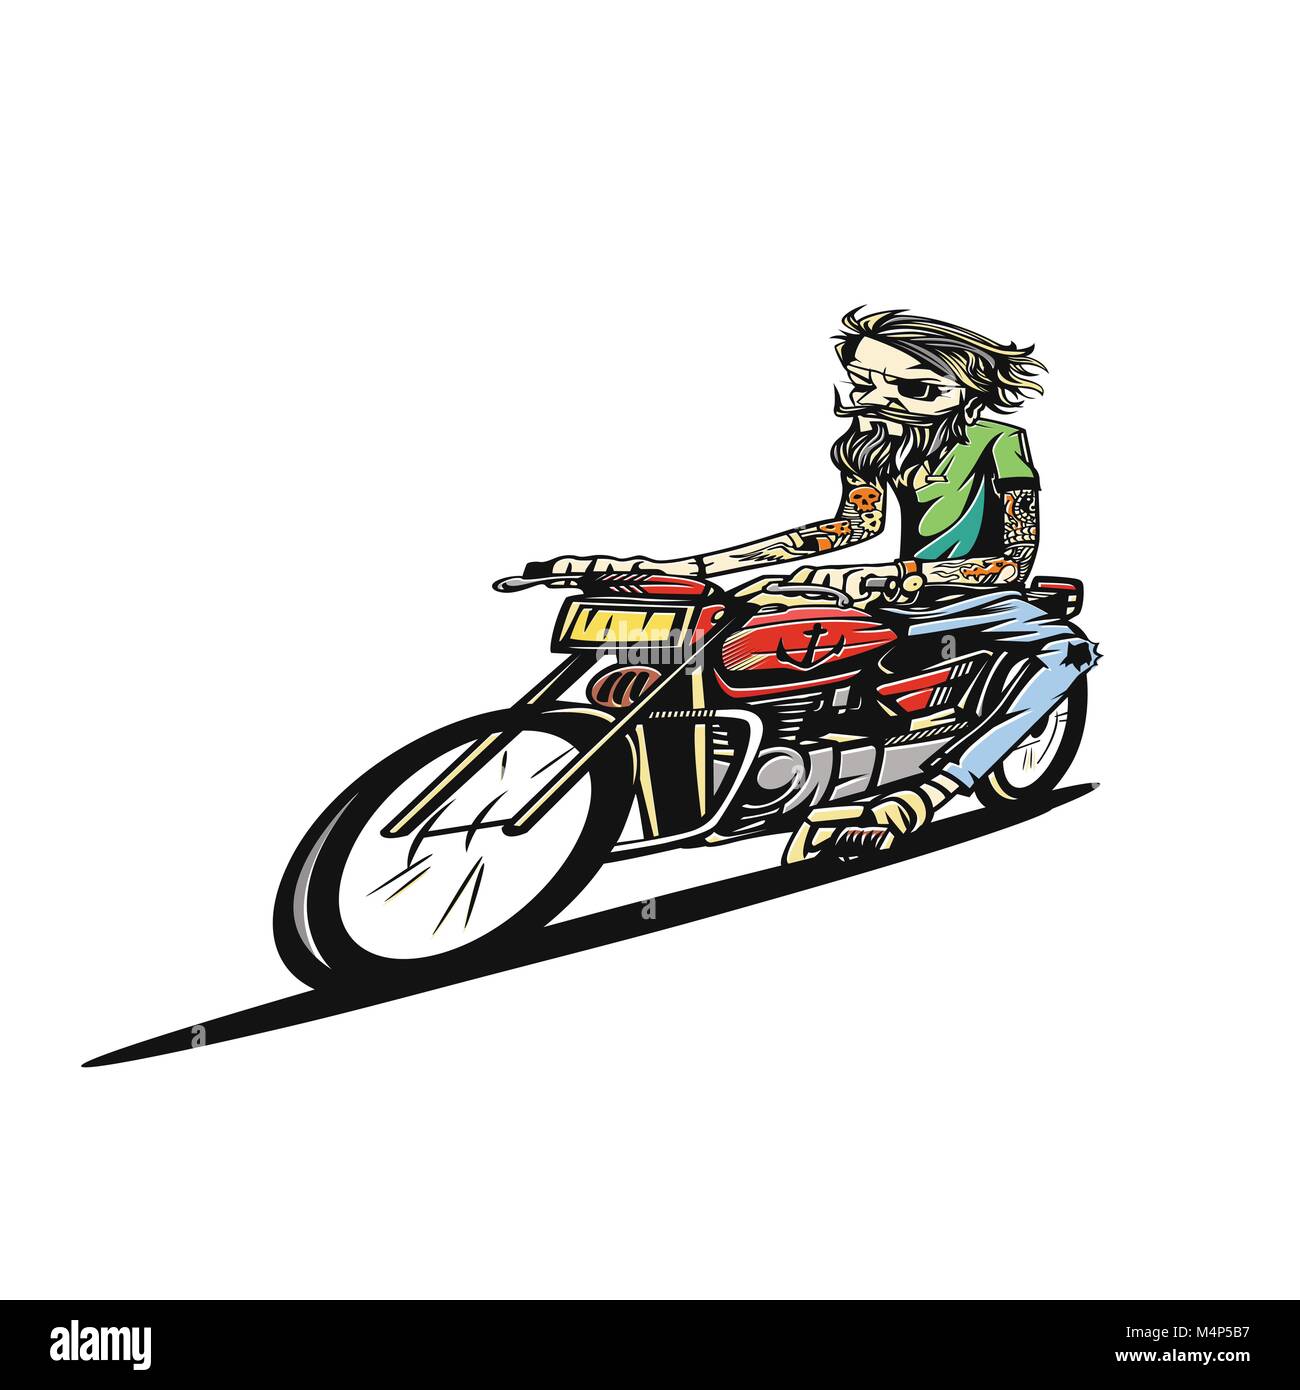 A man riding motorcycle on the road vector illustration. Stock Vector